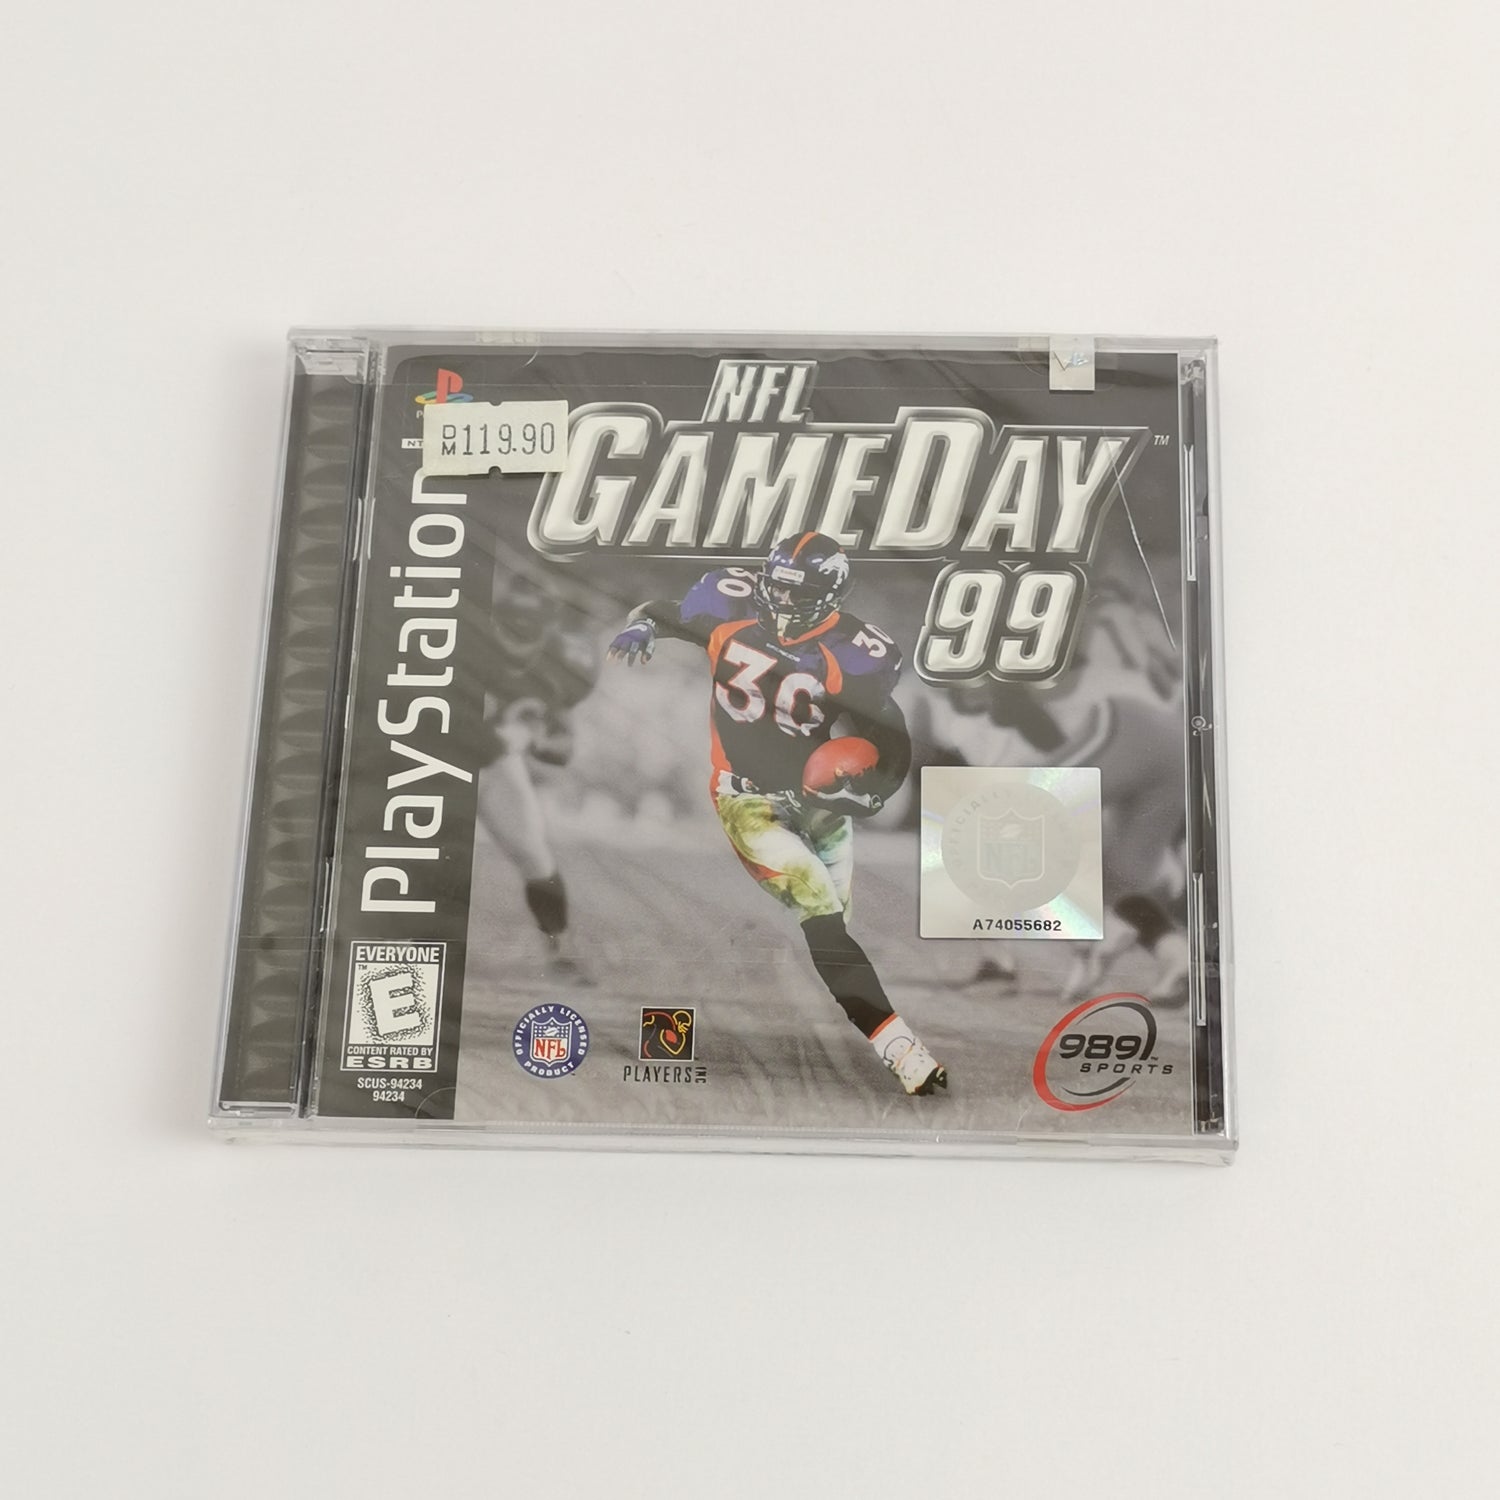 Sony Playstation 1 Game: NFL Gameday 99 | PS1 boxes - NEW NEW SEALED